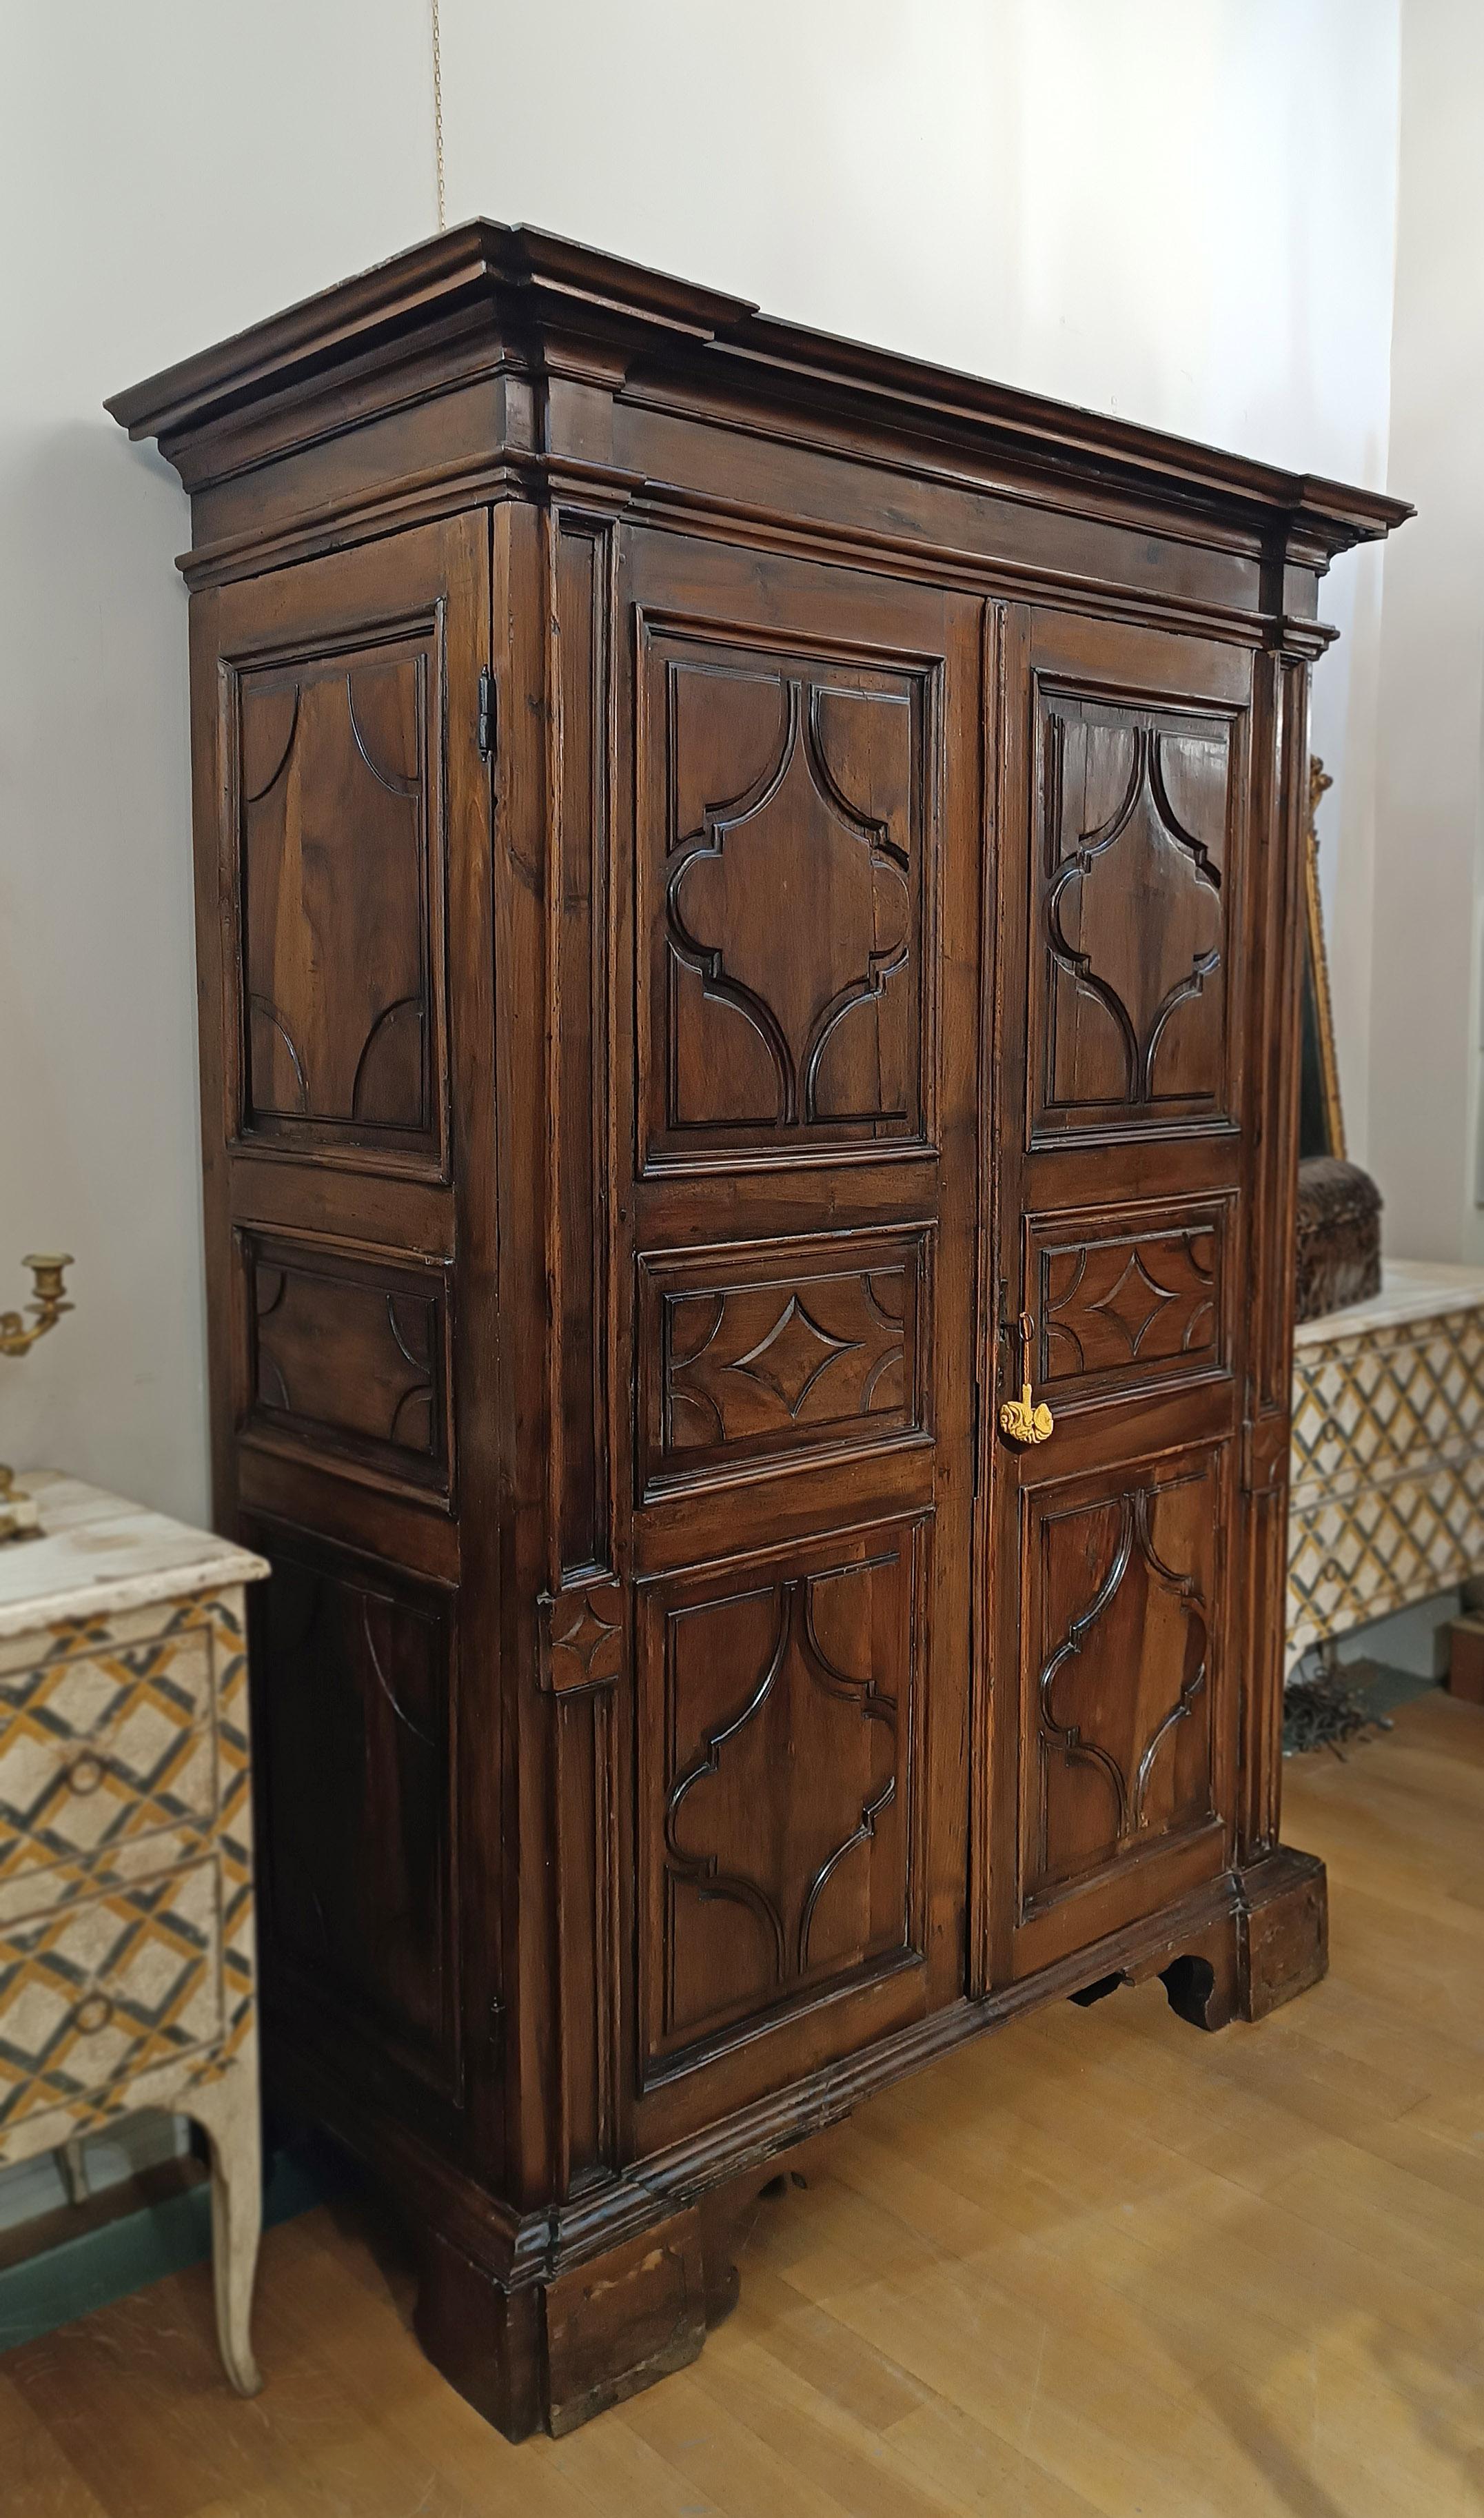 Louis XIV END OF THE 17th CENTURY LOUIS XIV WARDROBE IN SOLID WALNUT For Sale